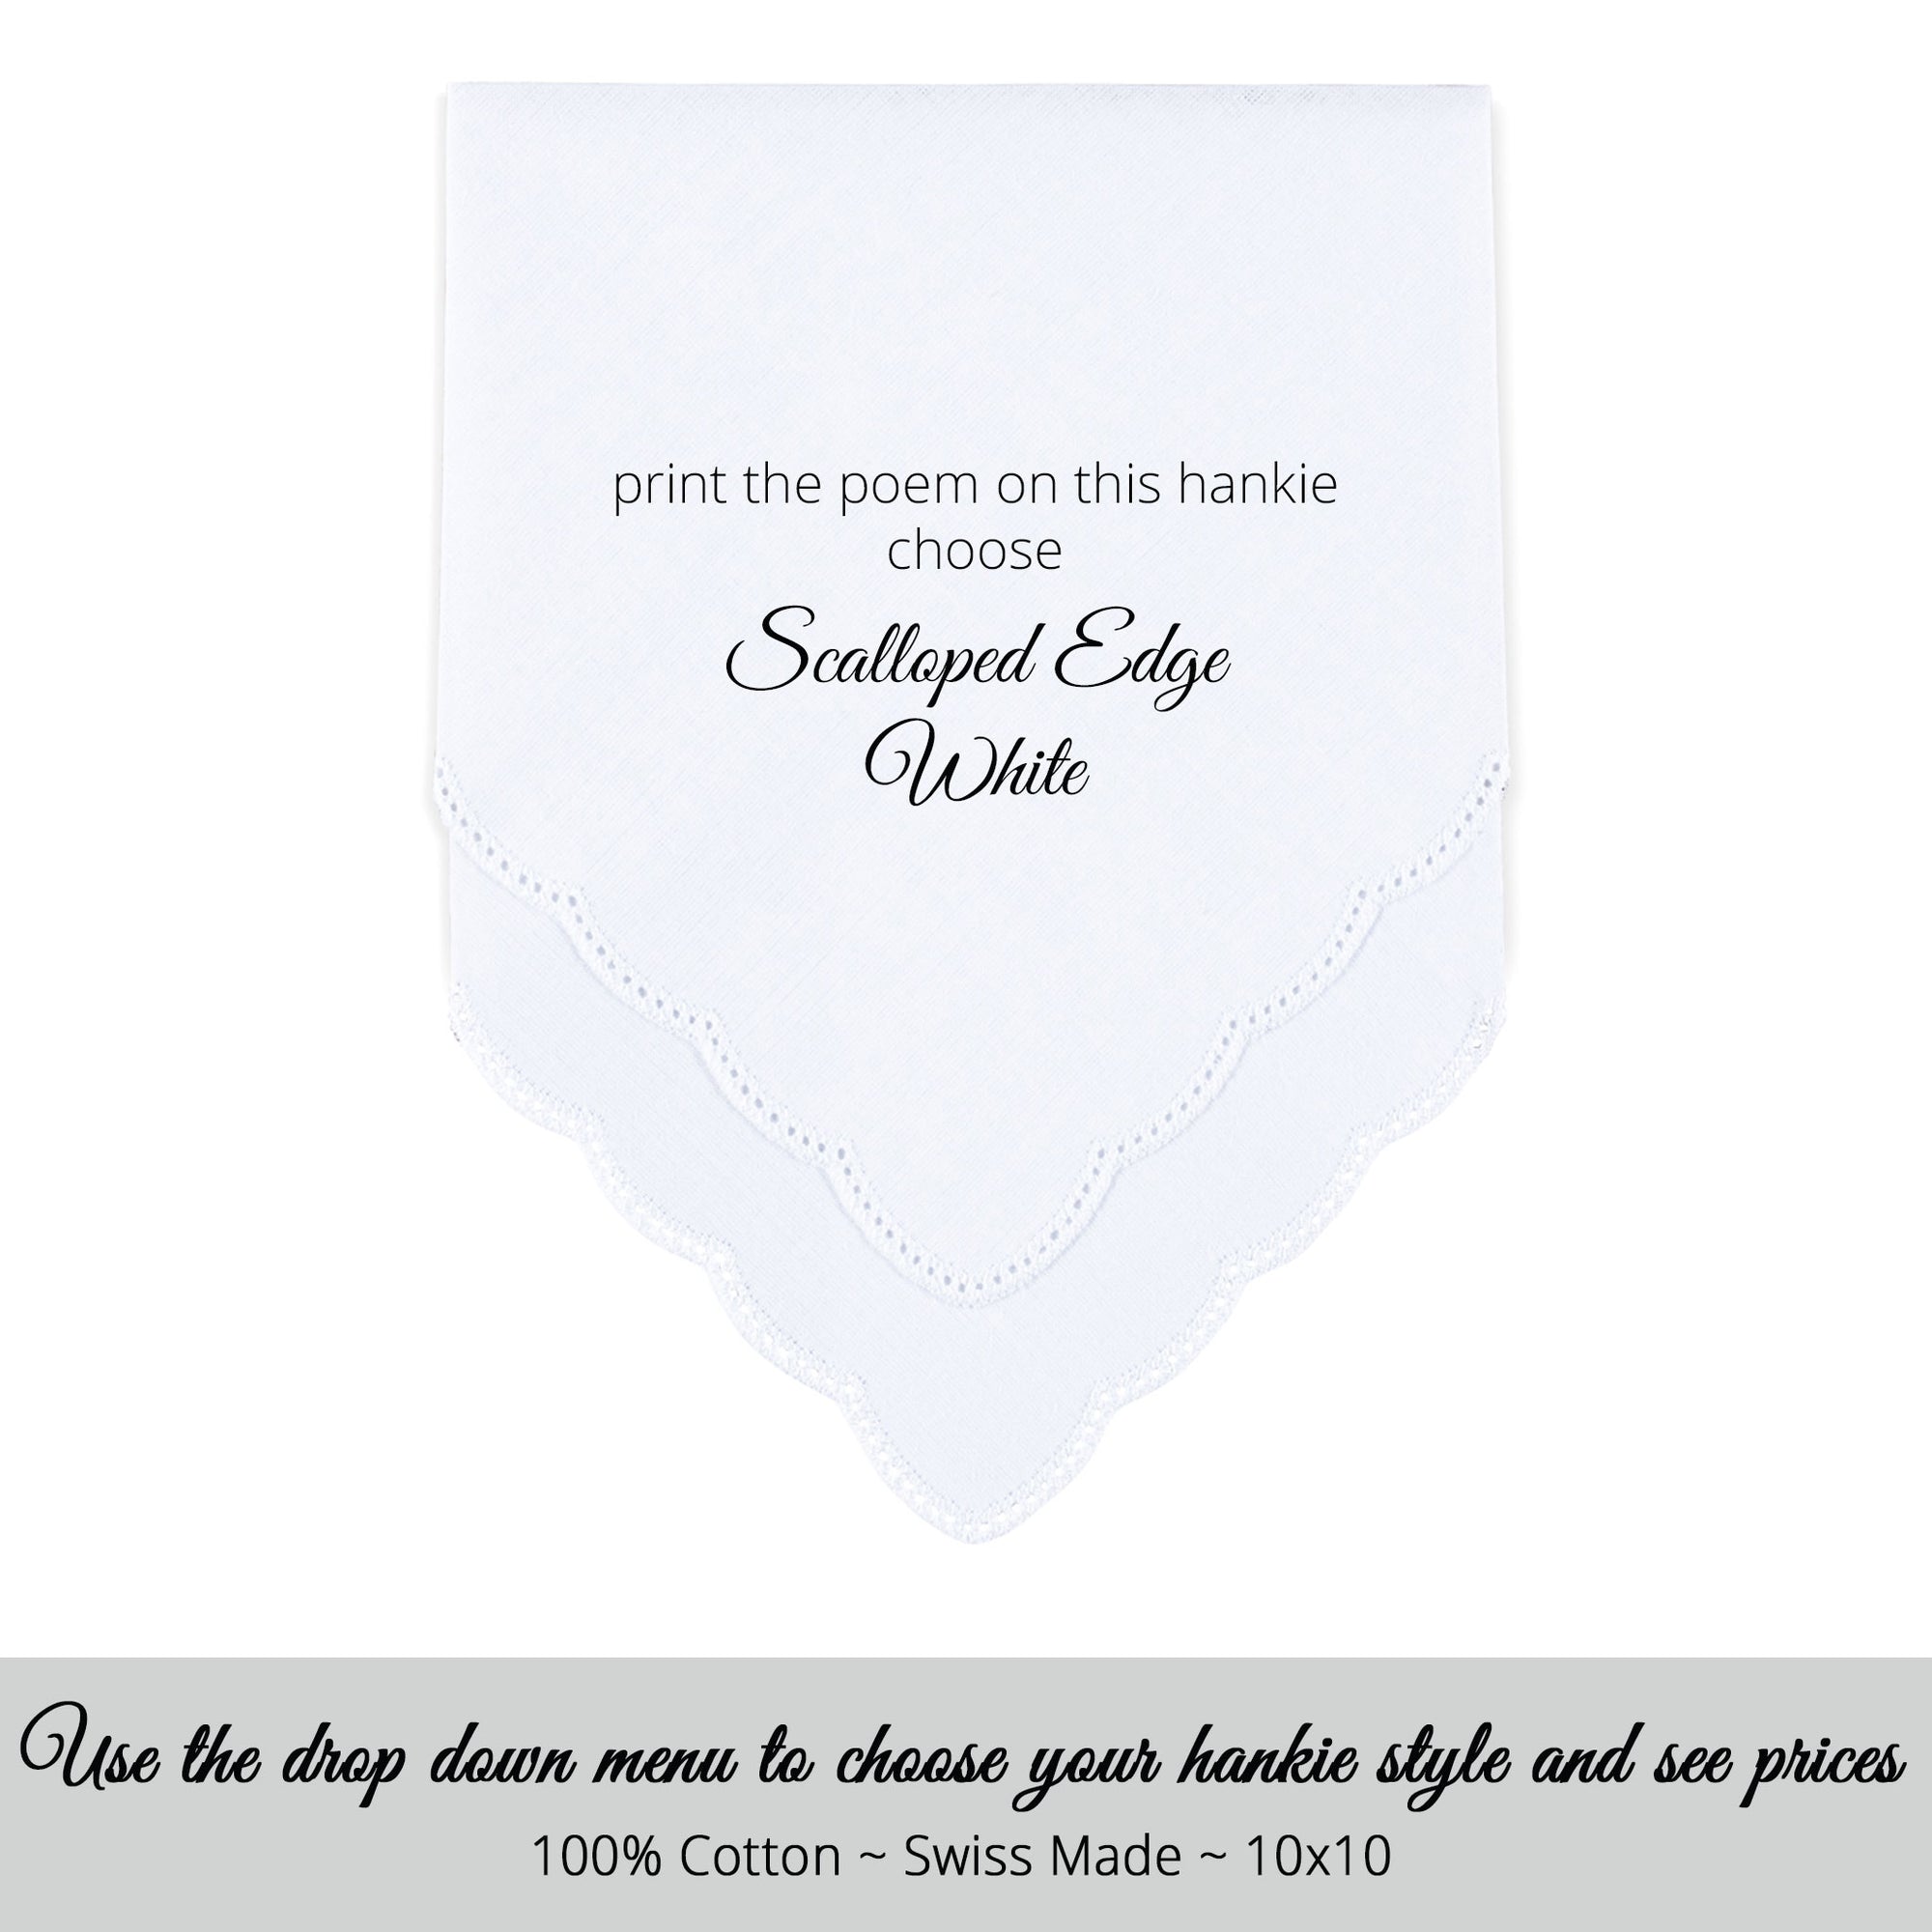 Wedding Handkerchief Scalloped edge white printed personalized poem for the bride